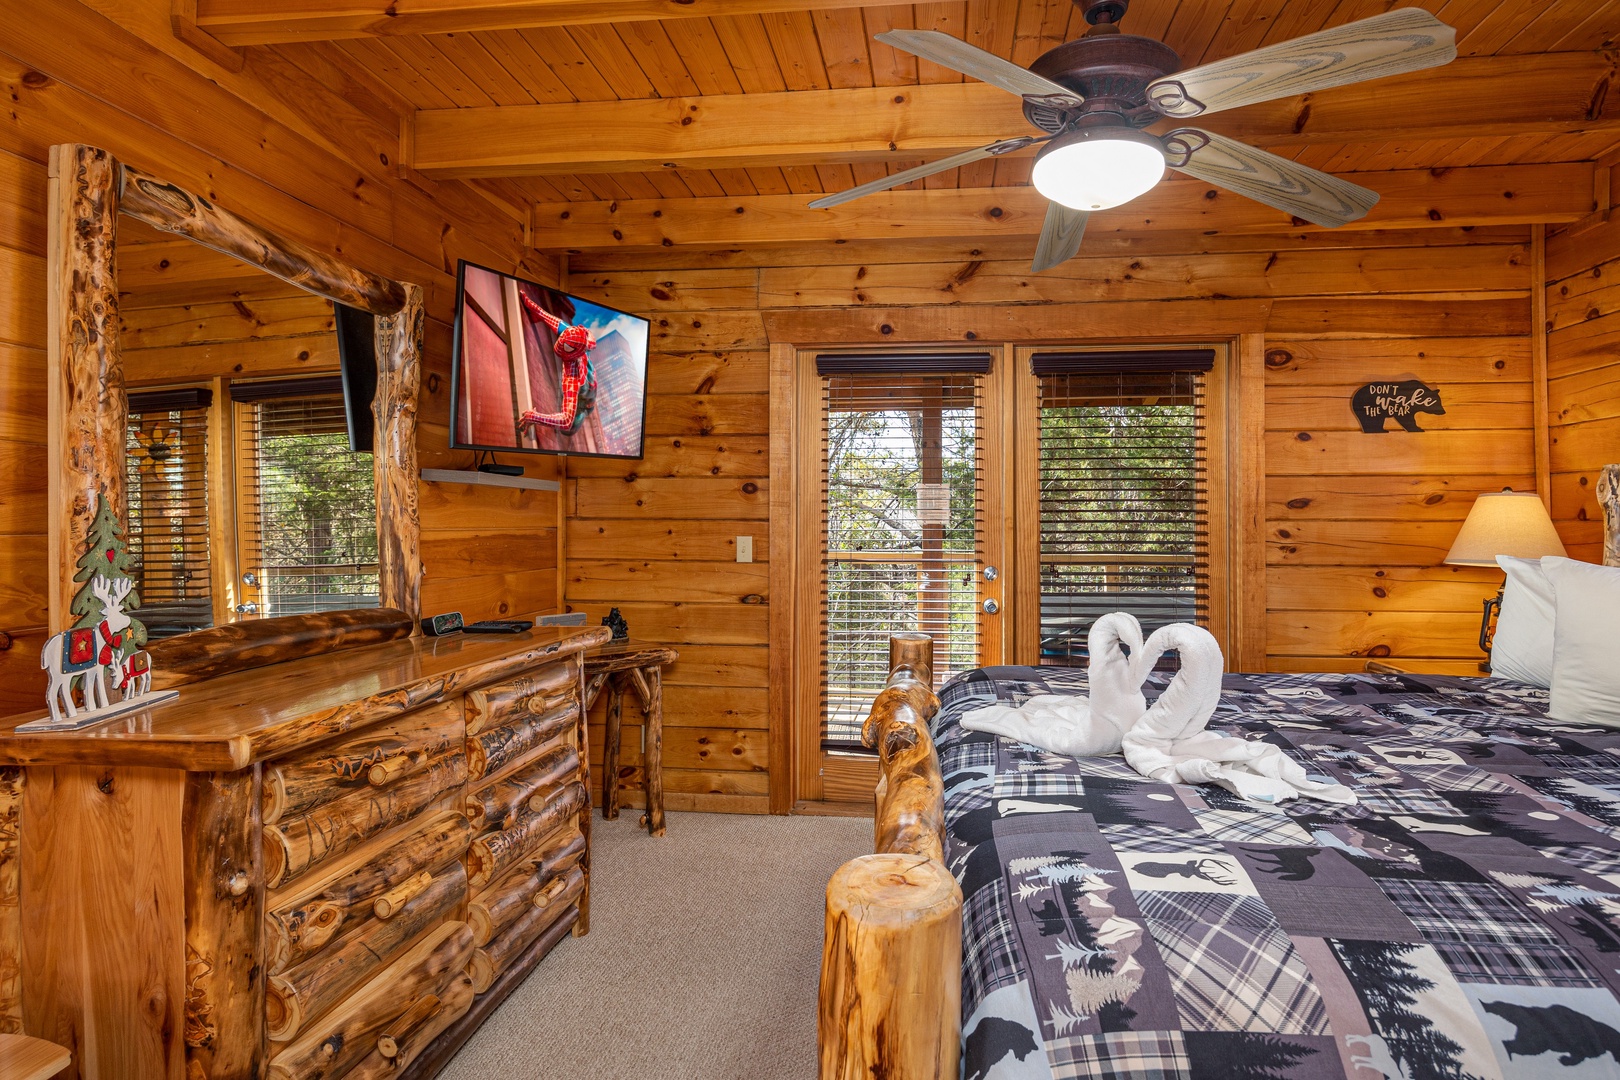 Wood dresser and flat screen tv in bedroom at Bear Feet Retreat, 1 bedroom cabin rental located in pigeon forge